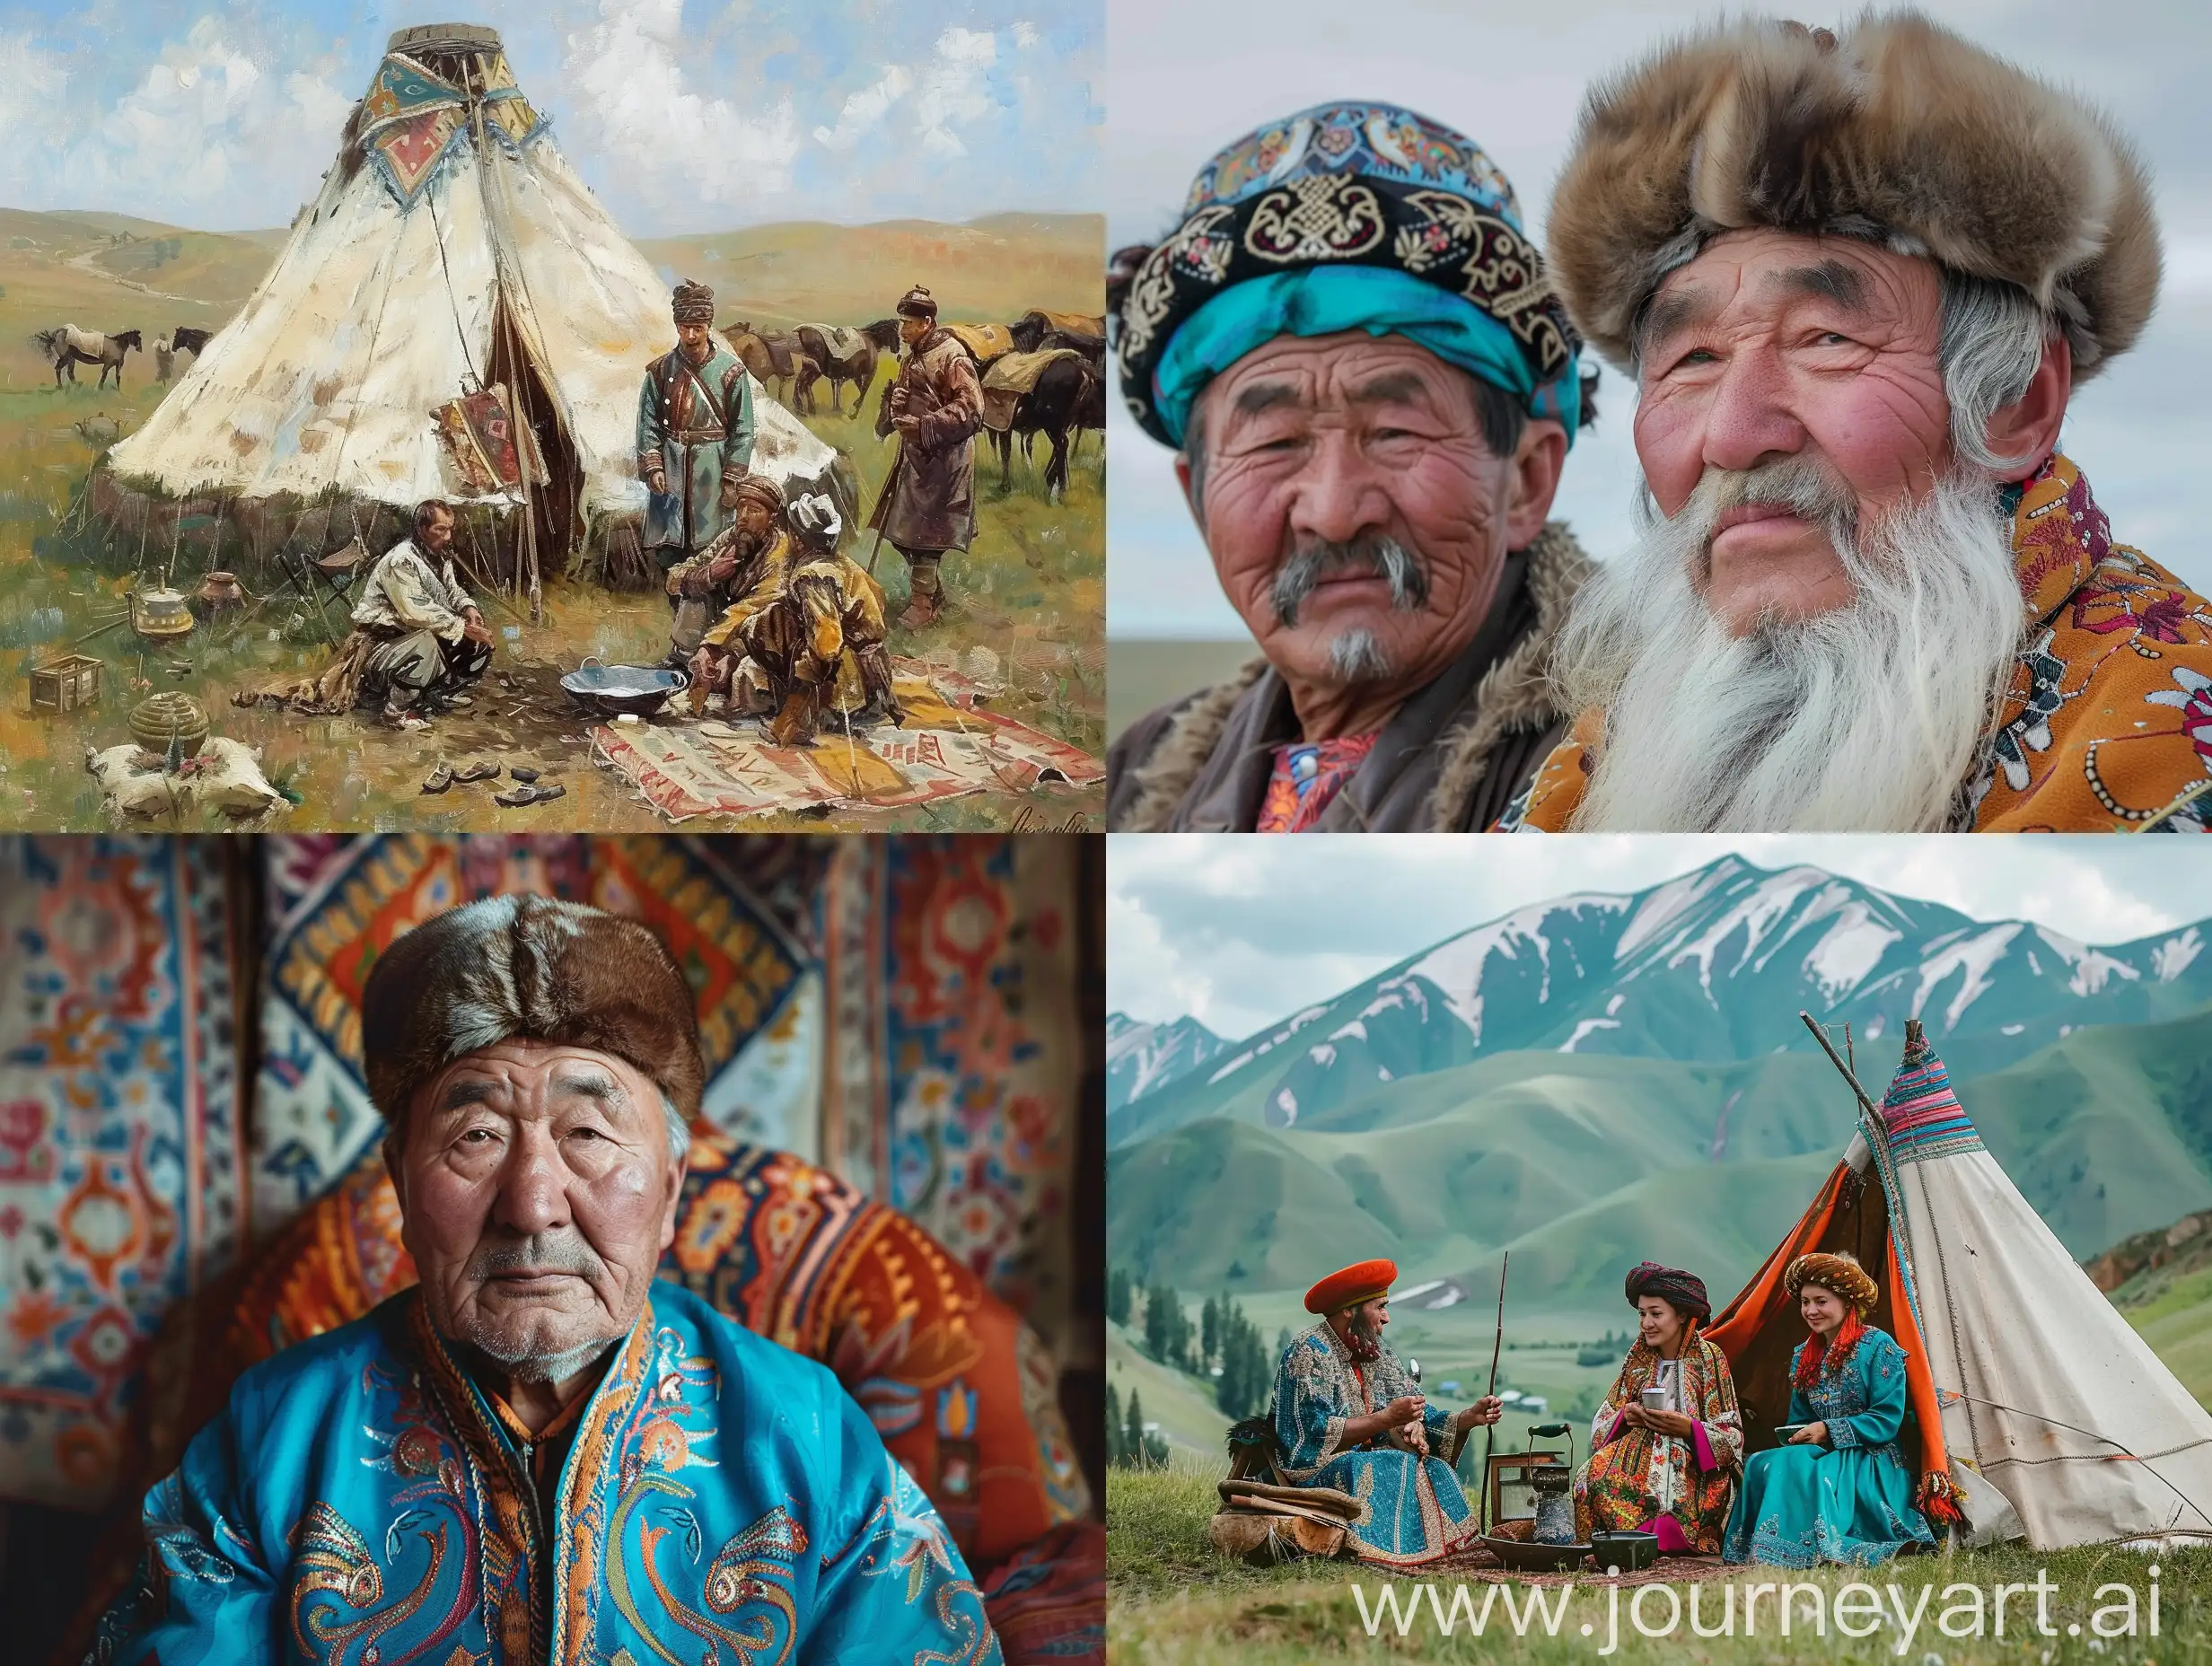 Traditional-Kazakh-Hospitality-Accepting-Guests-with-Warmth-and-Tradition